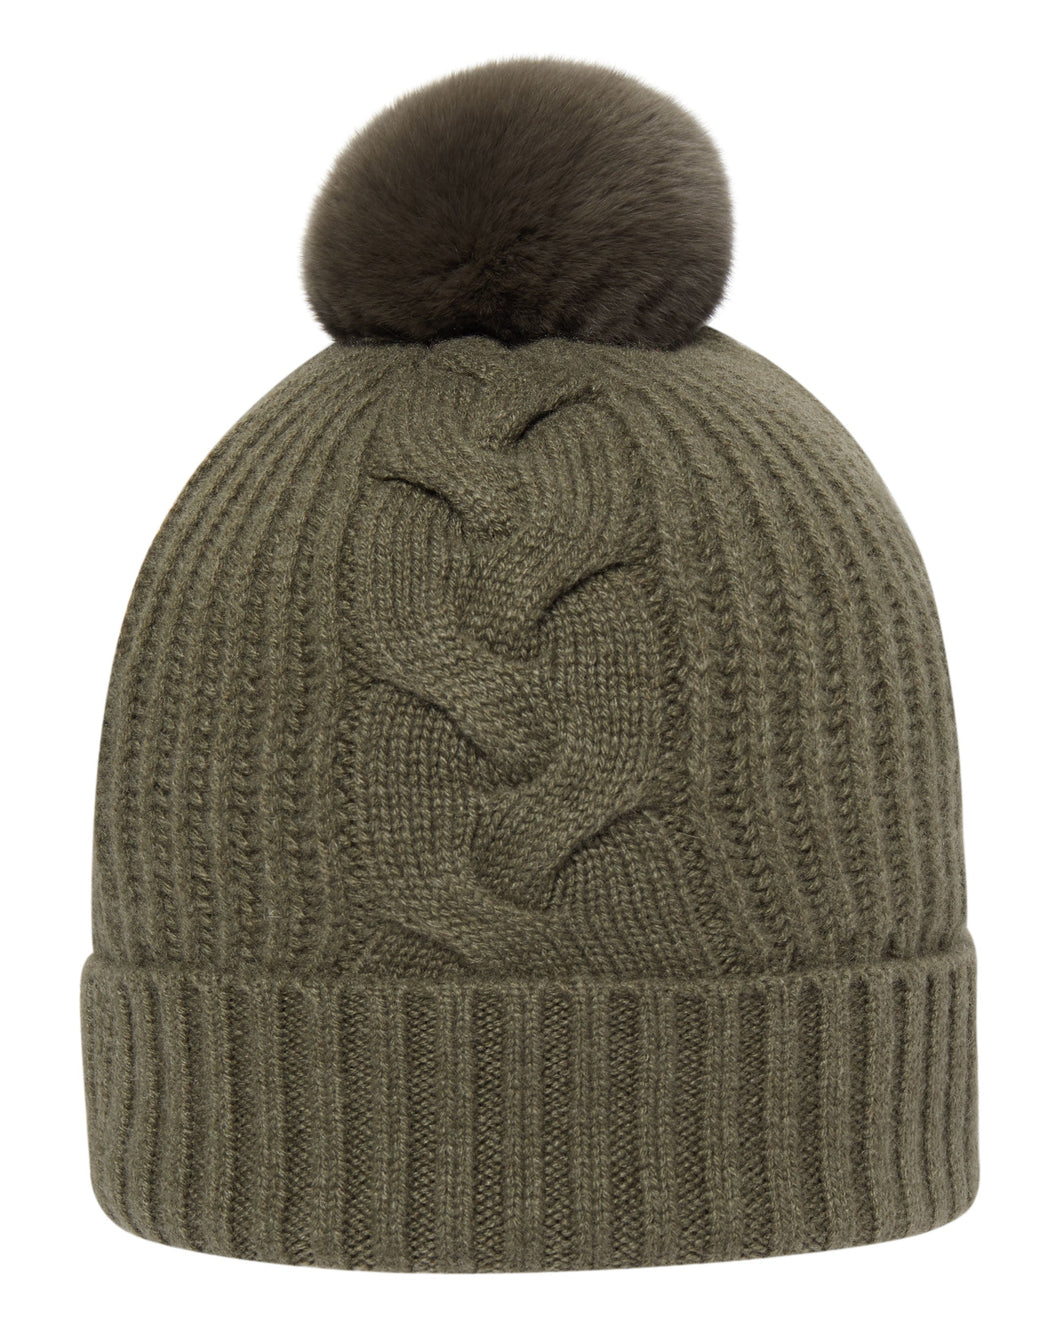 N.Peal Women's Fur Bobble Cable Hat Dark Olive Green